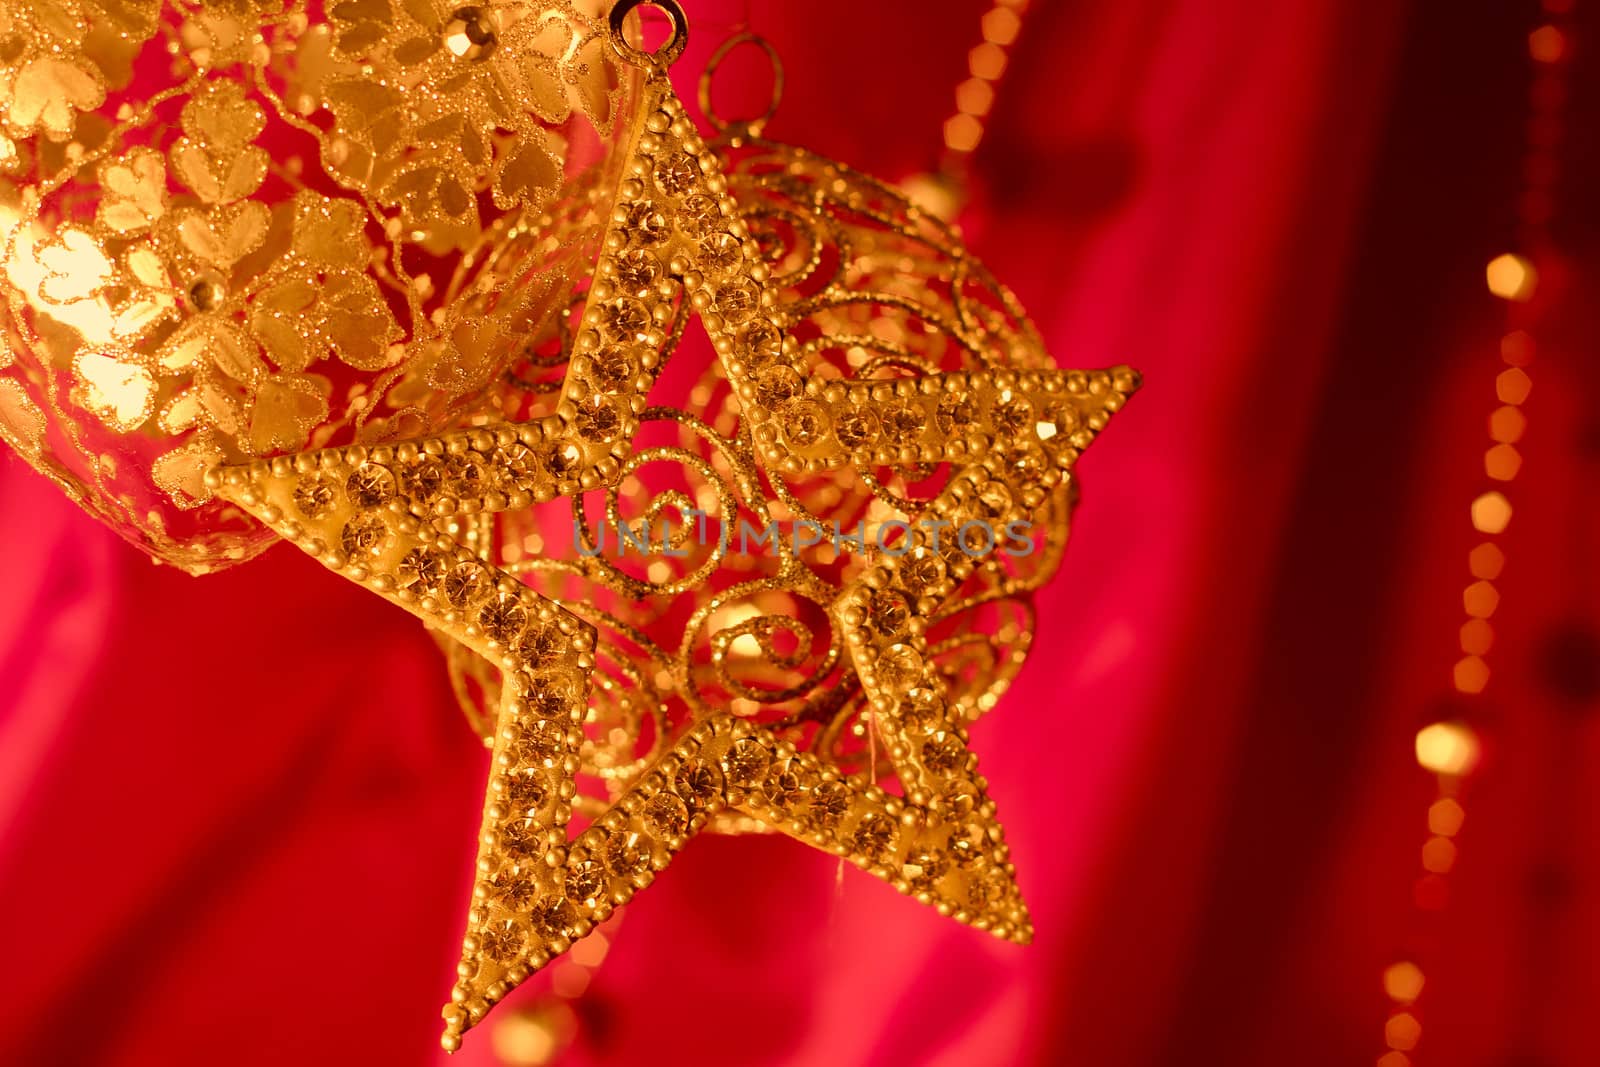 Golden christmas decoration on red fabric background